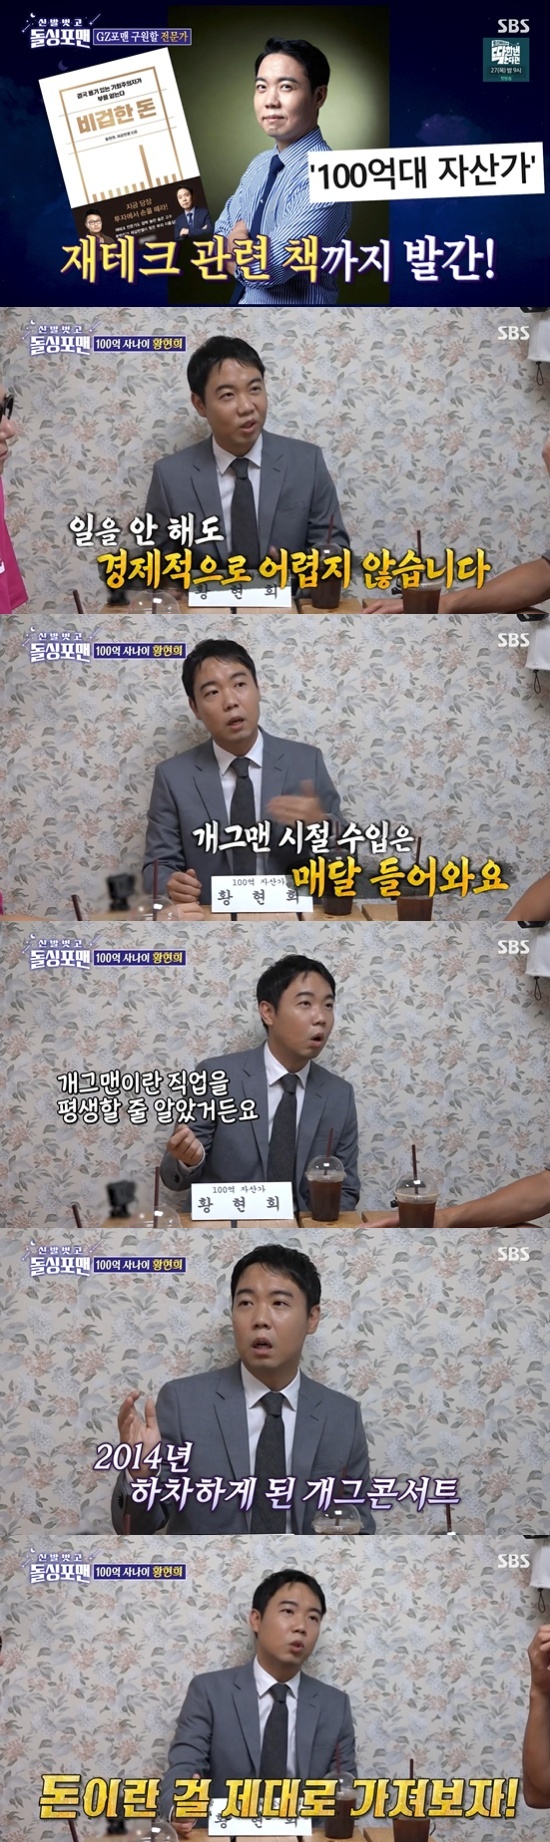 Assessor? No Indian difficulties without work (Dolsingforman)Hwang Hyun-hee on Dolsing Foreman for 10 billion KRWAs an asset owner, he showed a relaxed appearance.In the SBS entertainment program Take off your shoes and dolsing foreman broadcasted on the 25th, Hwang Hyun-hee, urologist Hong Sung-woo and divorce lawyer Choi Yuna talked with members of Dolsing Foreman.On this days broadcast, Hwang Hyun-hee is not Comedian but 10 billion KRWI met with members of Dolsing Forman as an asset manager and investment expert. When Hwang Hyun-hee, who is usually acquainted with me, appeared as a money expert, everyone was surprised and told Hwang Hyun-hee, I really have 10 billion KRWIs it there? he asked.Hwang Hyun-hee said, I thought Comedian would be a lifetime, but in 2014 it came out of Gag Concert. He said, Currently, the income earned during Comedian is coming in every month.Even if you do not work, it is not difficult for India. Hwang Hyun-hee said, I had a lot of worries about how to live after getting off the Gag Concert. Then I thought, Lets own the money properly. I went to India graduate school for two years and studied hard from the basics.And after two years of preparation, I took out a loan and invested in real estate, he said.Hwang Hyun-hee is saddened by the way many people listen to their acquaintances and invest, saying, The worst Ida. I always say, Ill let you know.If you start investing when others cheer, you will pay for the festival. Hwang Hyun-hee added, It is the worst thing to blame others after failing to invest. Who told you to invest? Ida is your share of investment. You should never blame others.Hwang Hyun-hee said, When people make investments, they are always impatient. When others start to make money, they become impatient, and they should not be impatient. In order to invest, they should spend as much time and effort.Lastly, Hwang Hyun-hee named Kim Jun-ho as one of the members of Dolsing Forman who seemed to be the worst investment.Hwang Hyun-hee asked Kim Jun-ho, who is currently doing business, Do you know how to look at financial statements?If you want to continue your business in the future, statistics and accounting studies are essential. Photo=SBS broadcast screen